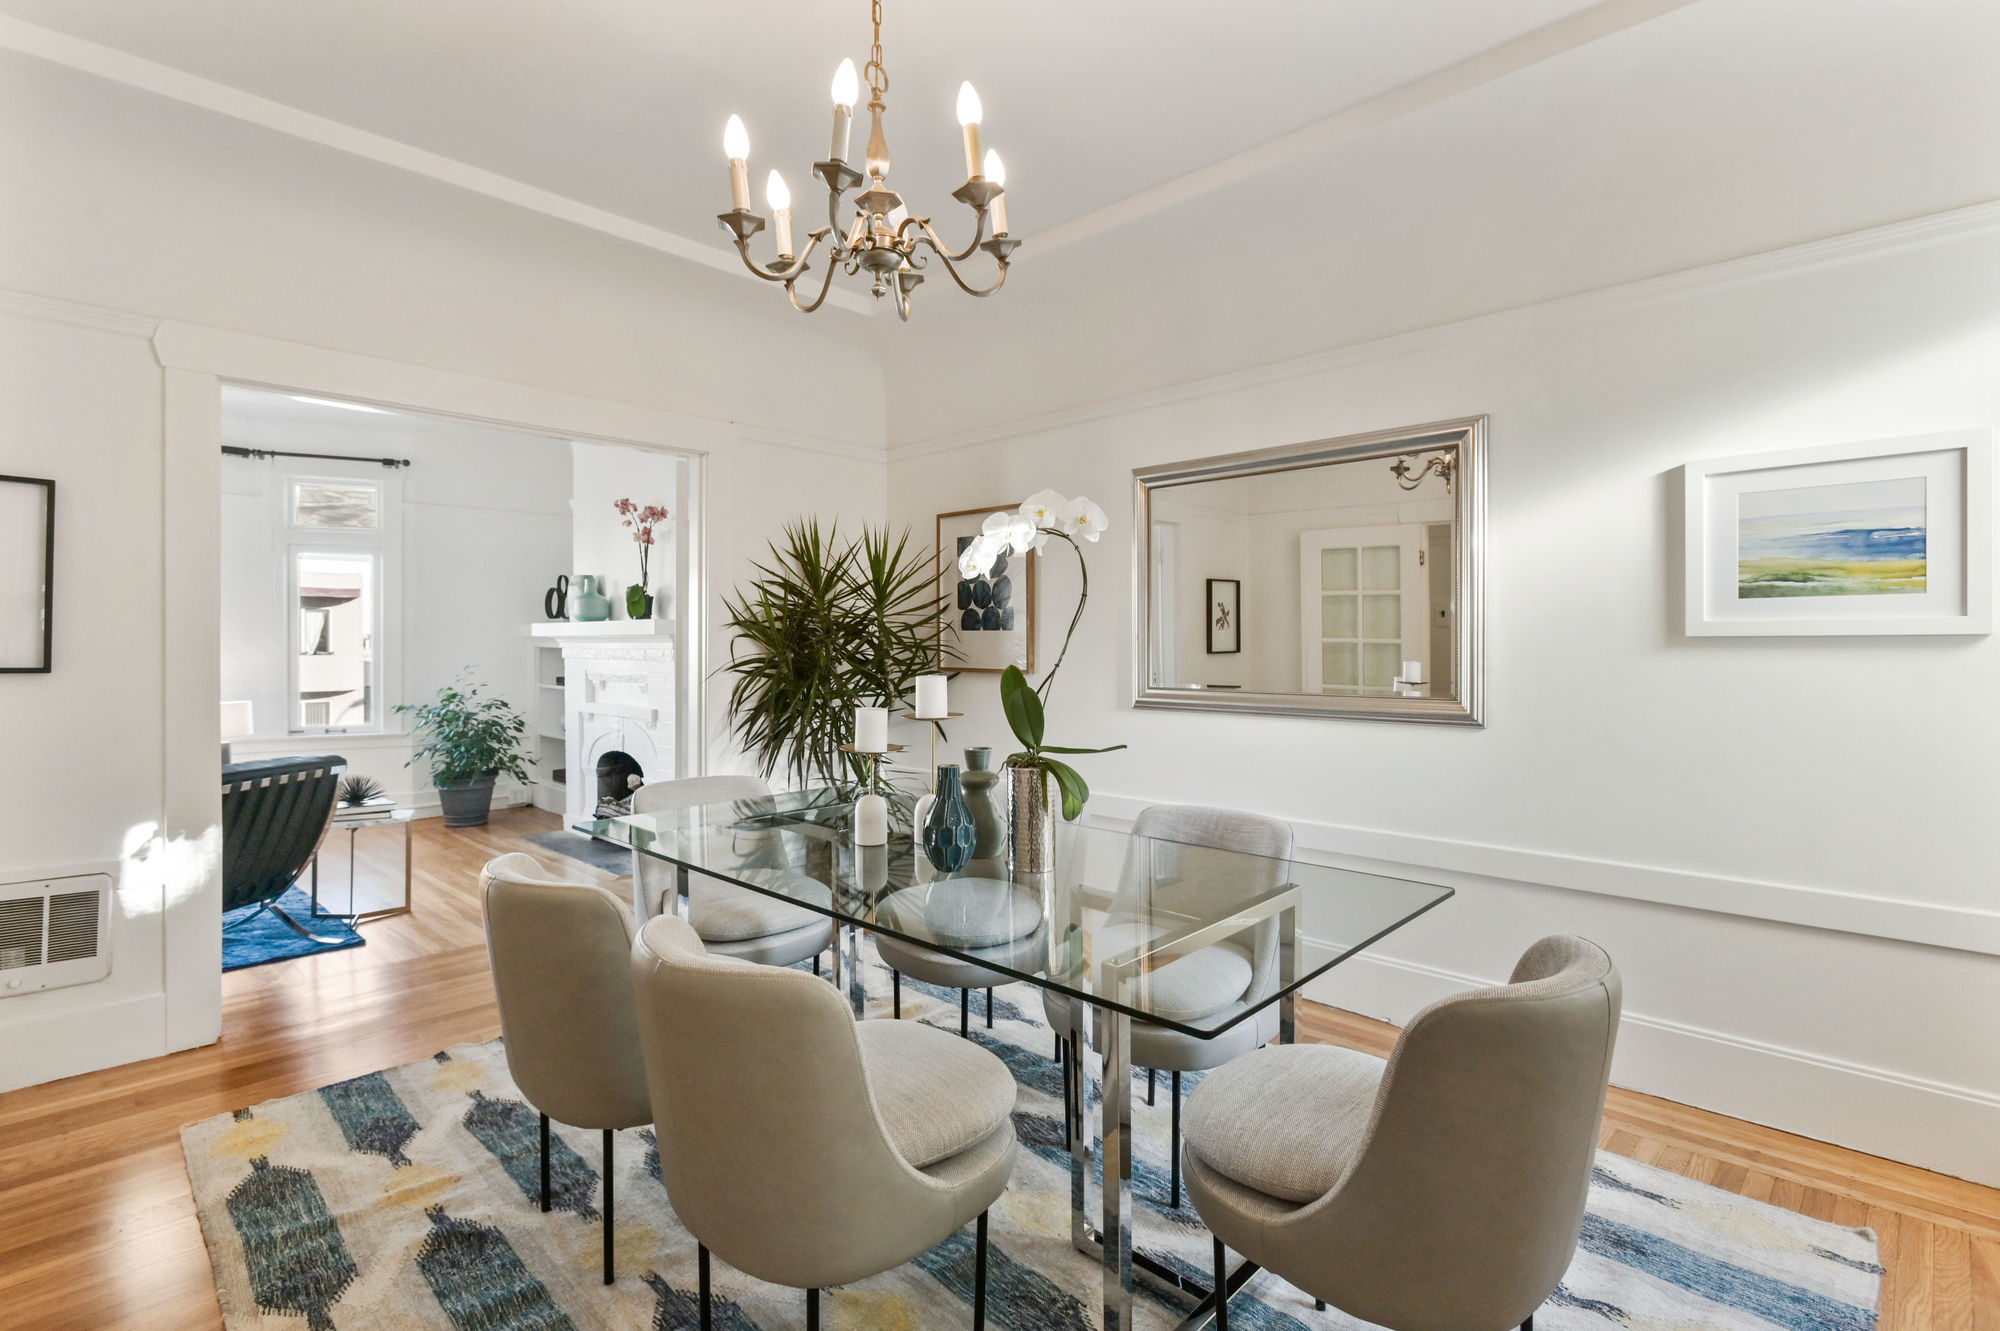 Property Photo: Formal dining area with wood floors and white walls